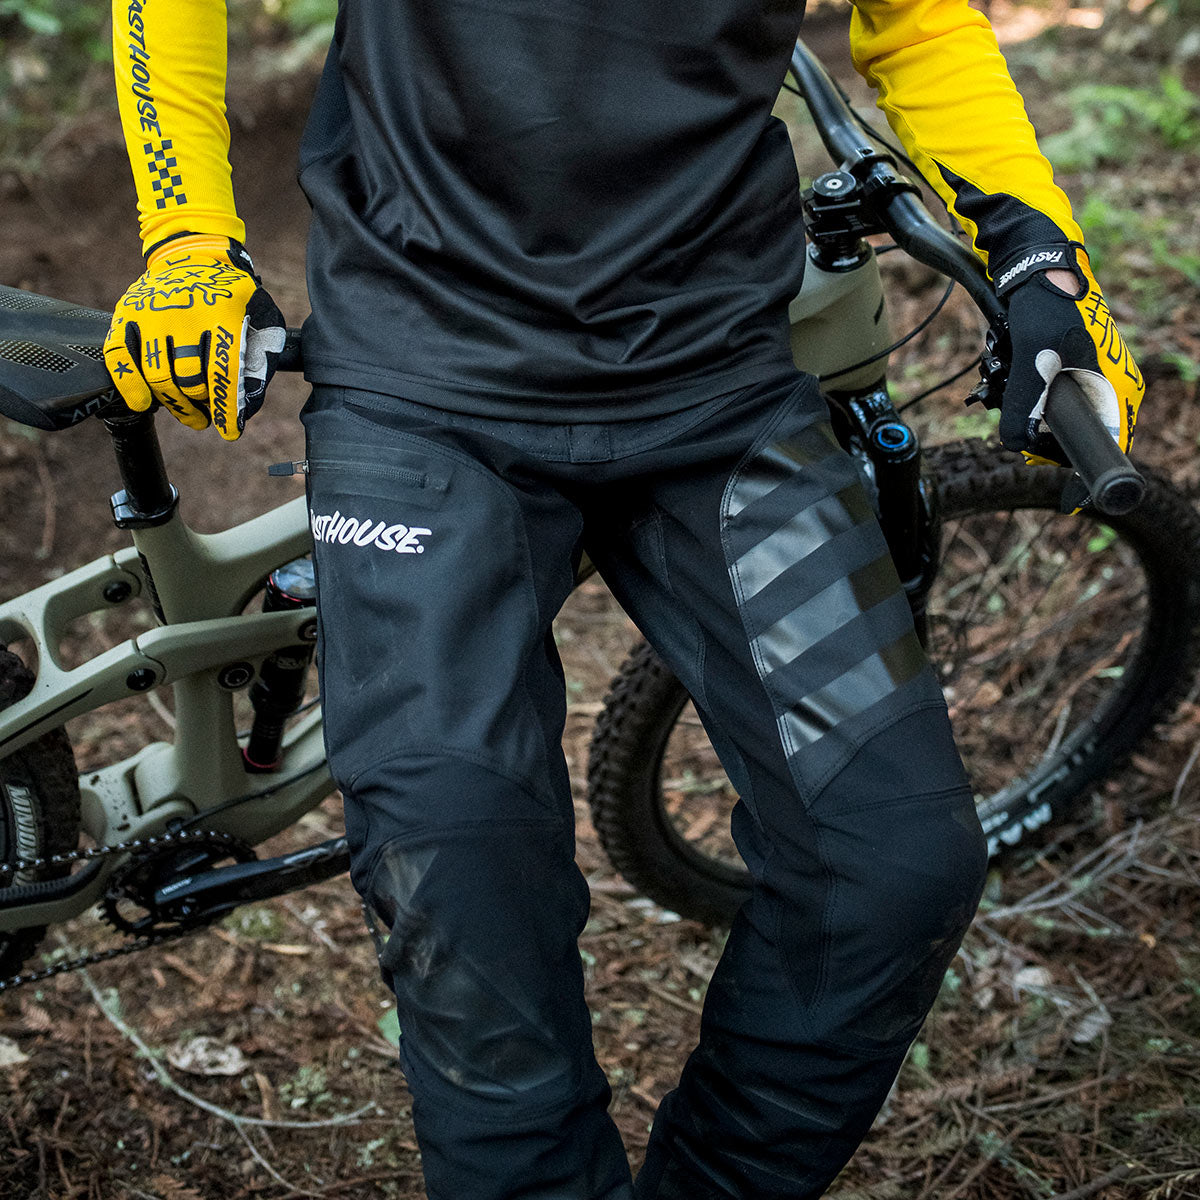 Fastline 2.0 Youth MTB Pant - Black – Fasthouse